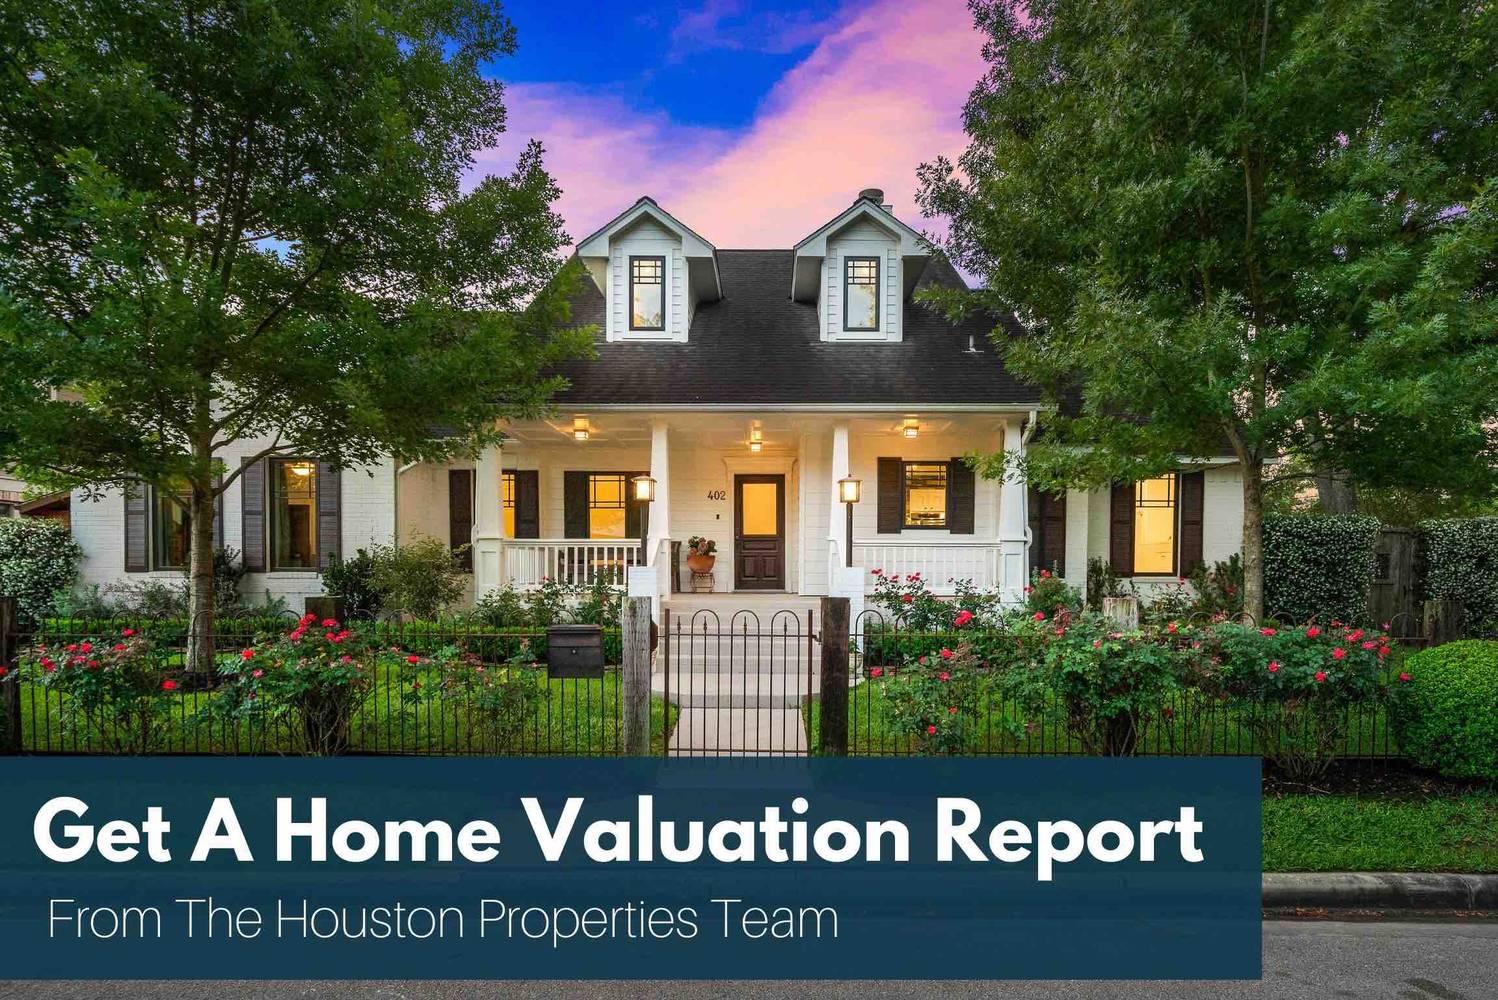 Getting Started with Selling your Heights Home: Get A Free Valuation Report Now!